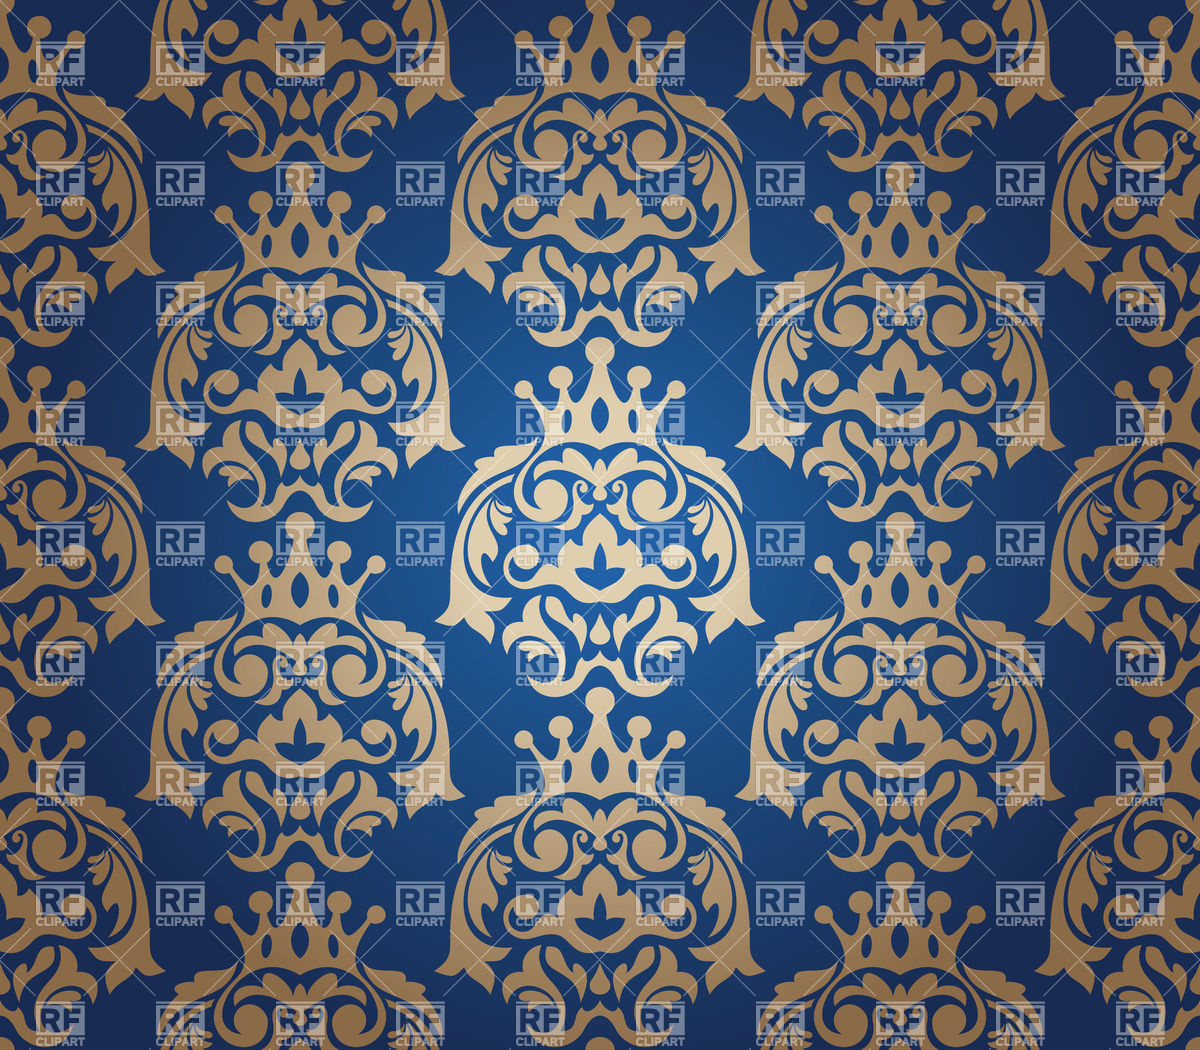 Seamless Golden And Blue Damask Wallpaper Royalty